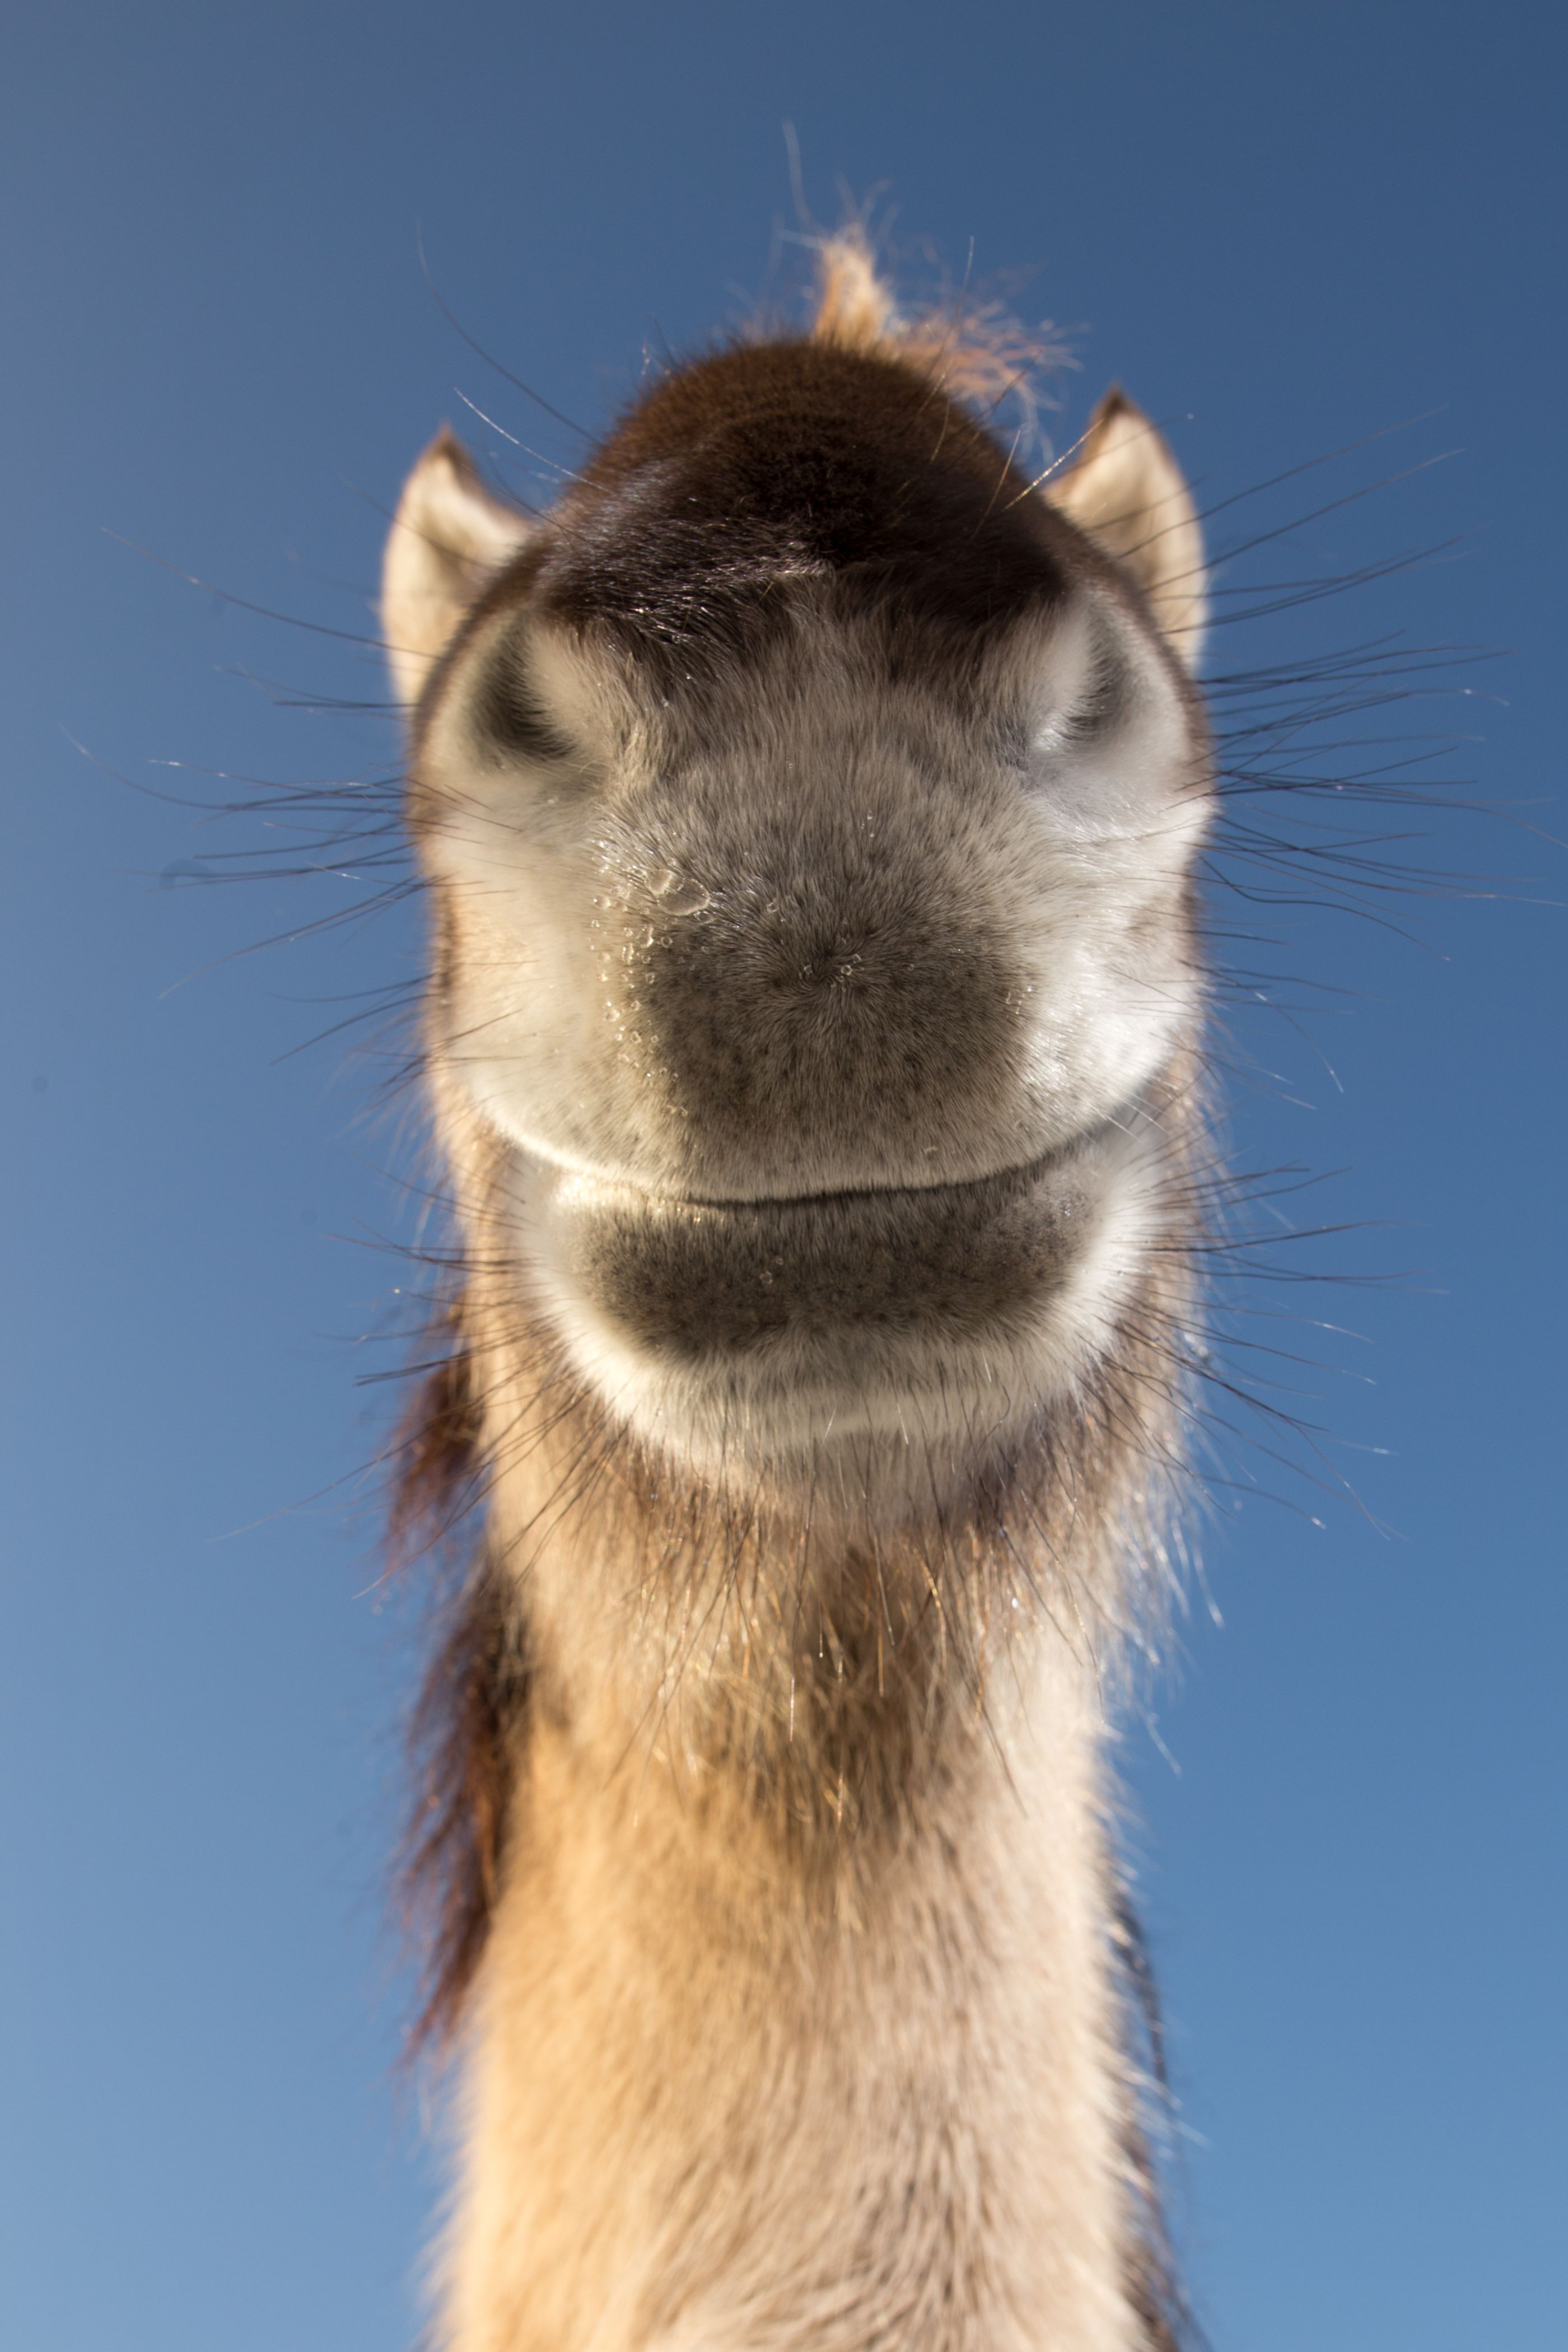 Extreme close up of horse mouth